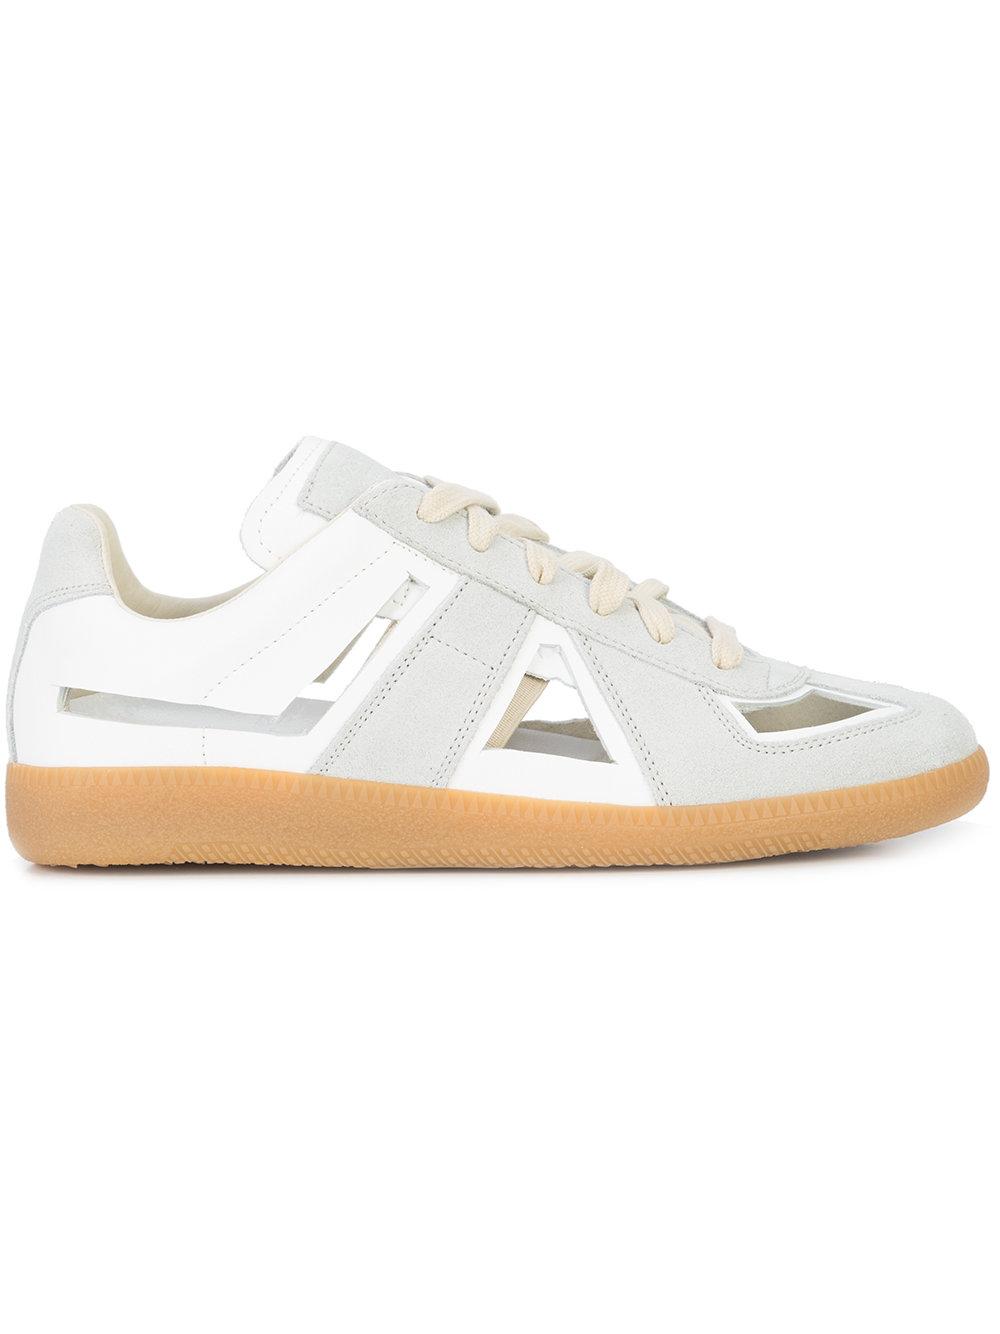 9 Cutout Sneakers to Keep Your Feet Cool This Summer | Who What Wear UK